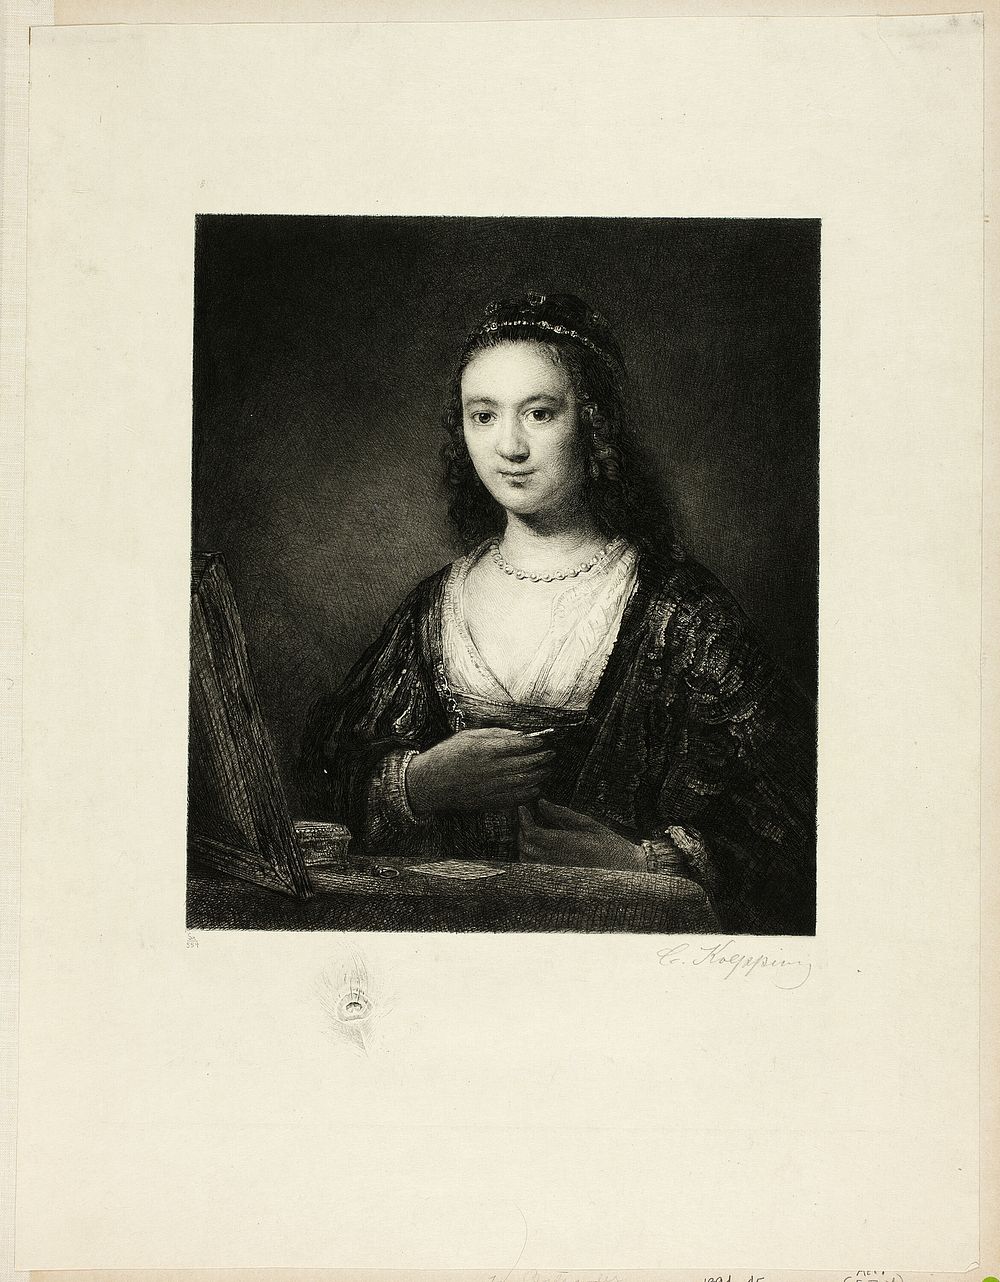 Portrait of a Woman by Karl Koepping (Engraver)